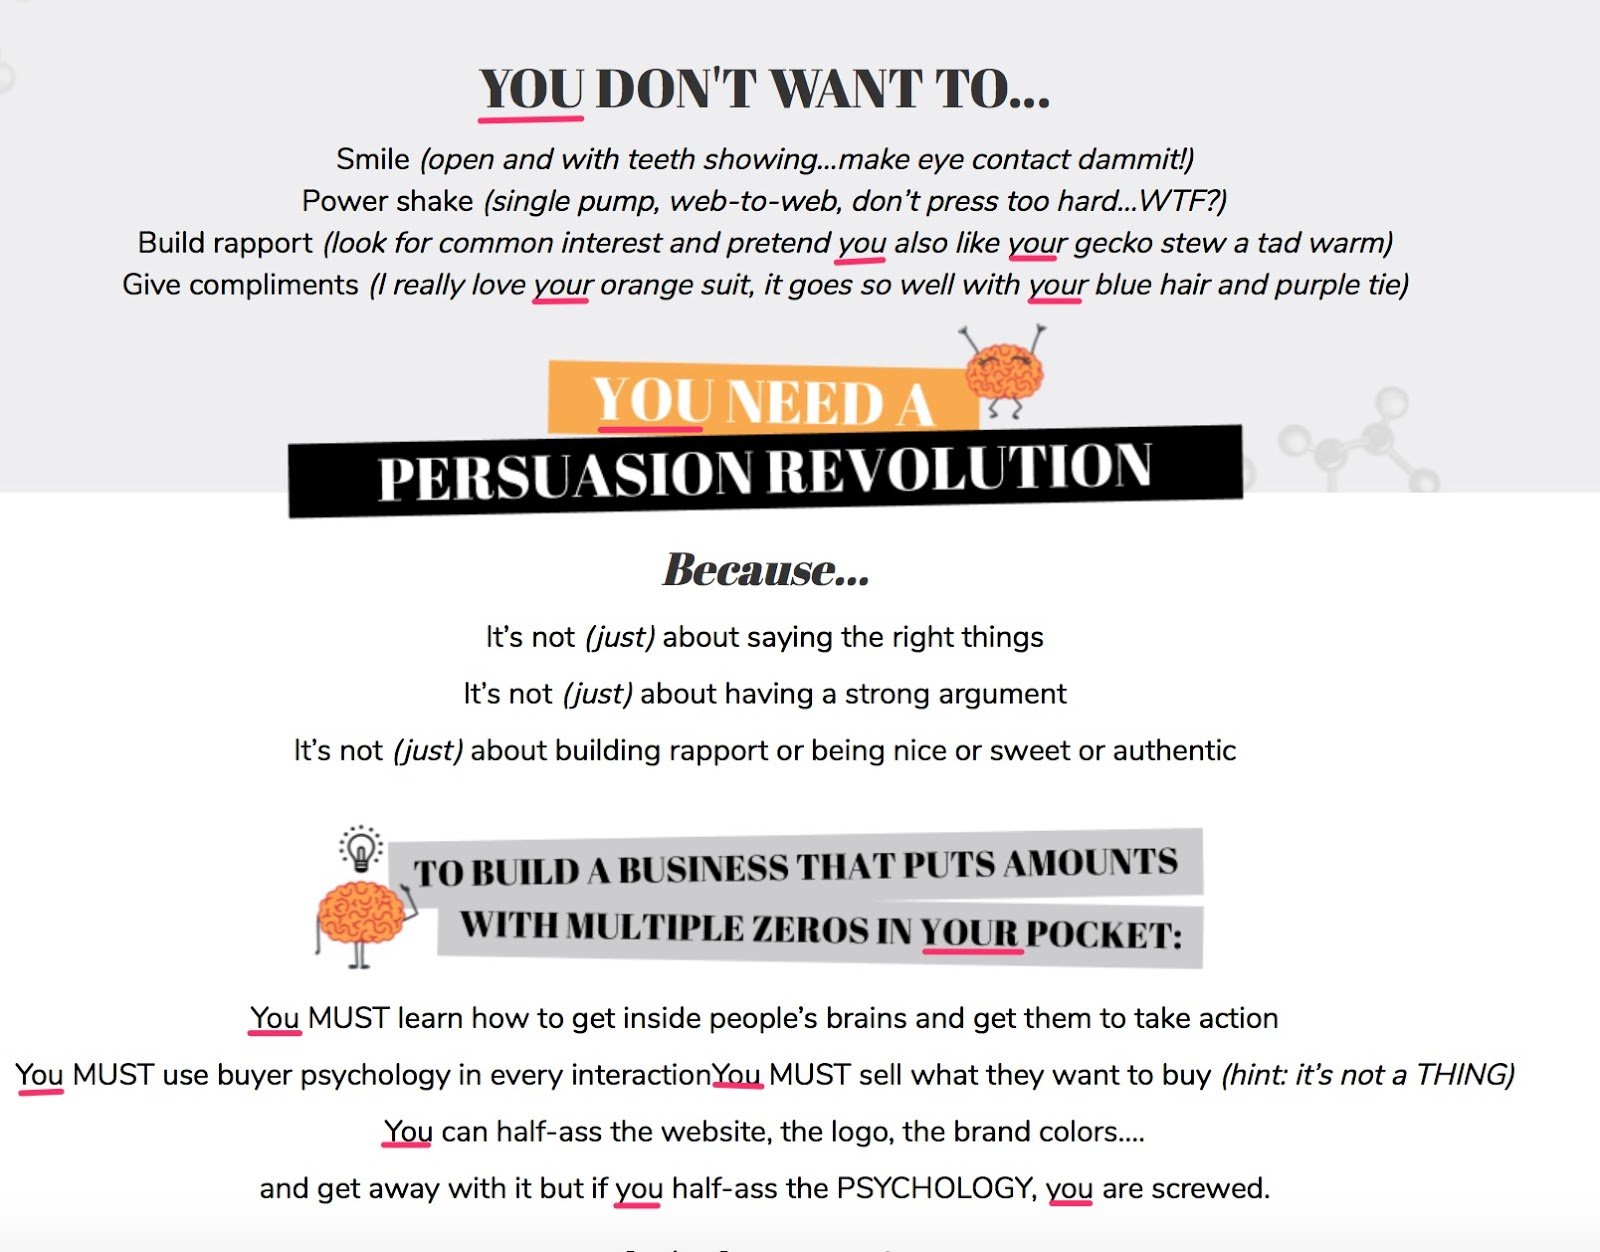 About The Persuasion Revolution